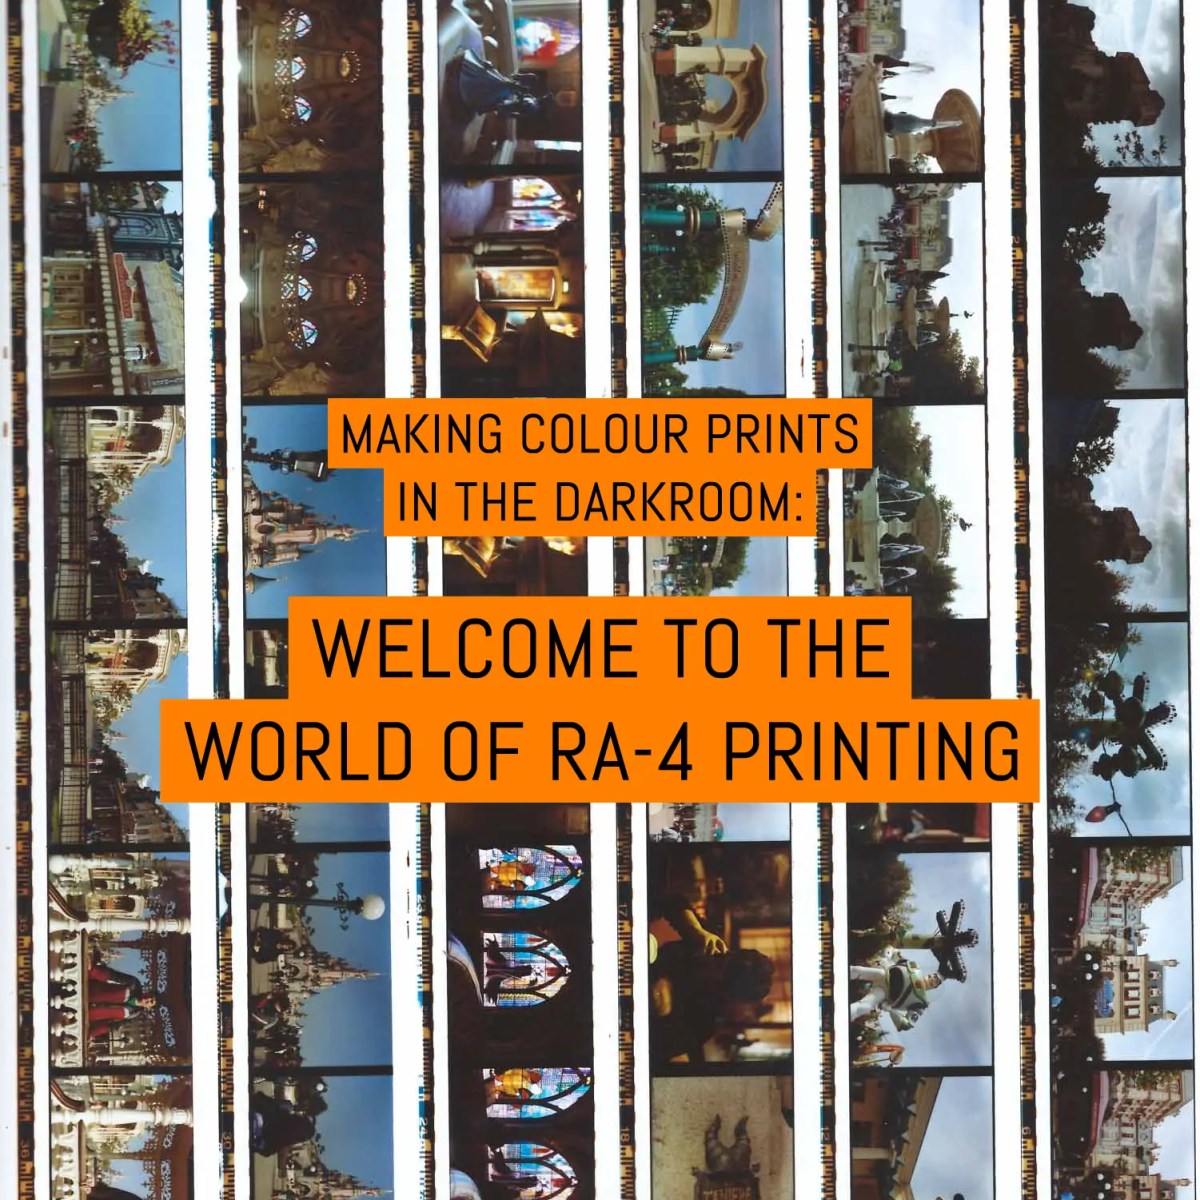 Making colour prints in the darkroom: welcome to RA-4 printing